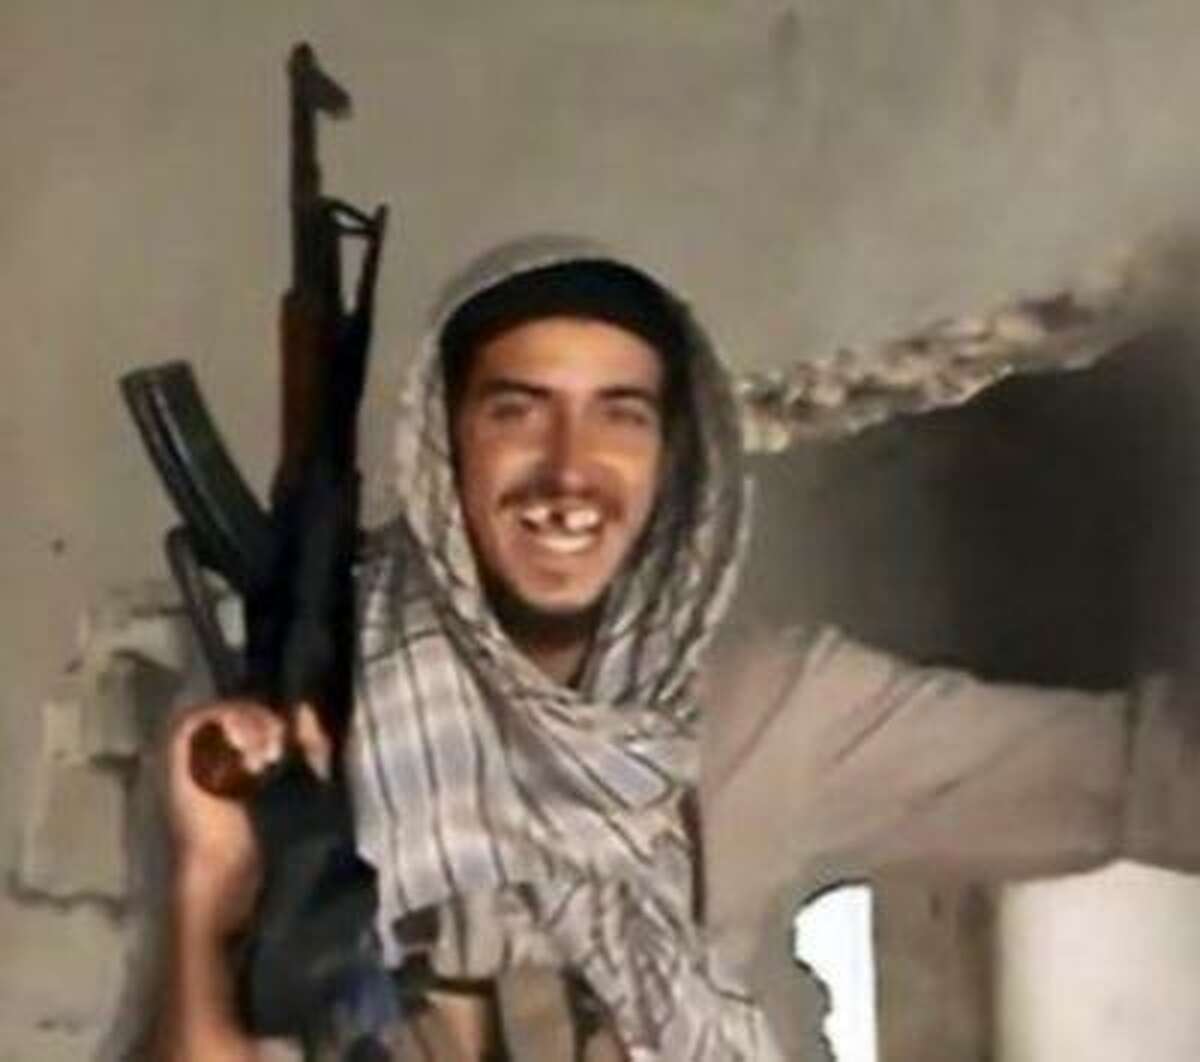 A man identified as Muhammad Al-Amriki is featured in a new al-Shabaab recruitment video posted to YouTube Thursday, August 8, 2013. Al-Amriki, also known as Troy Kastigar, is allegedly one of three Minneapolis men in the video who traveled to Somalia and died fighting there.